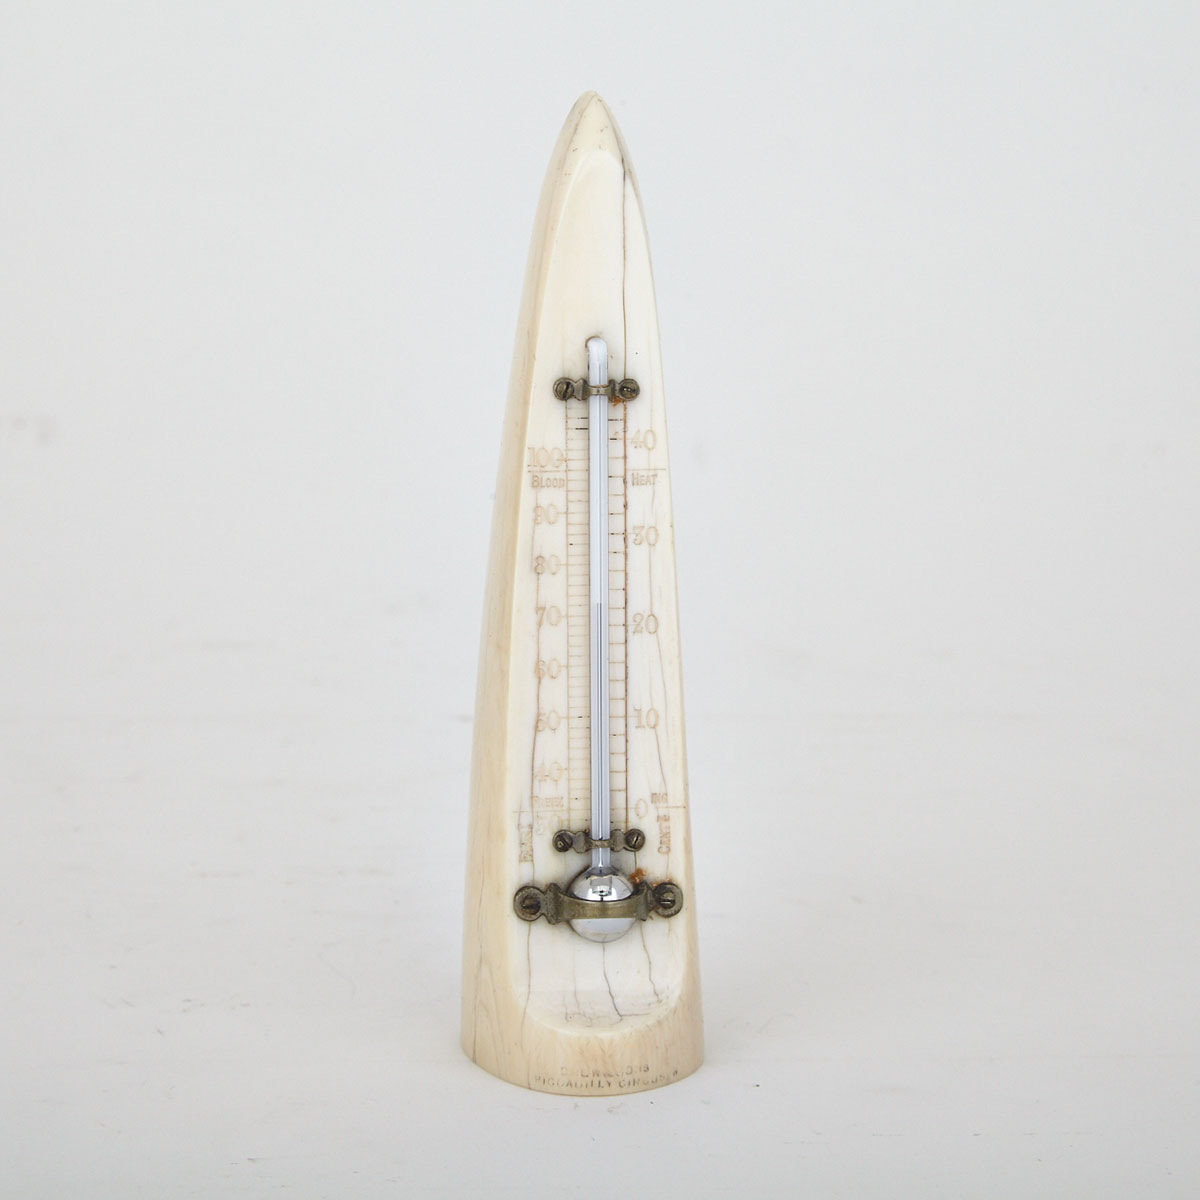 Ivory Tusk Desk Thermometer, Drew & Sons, Piccadilly Circus, 19th century